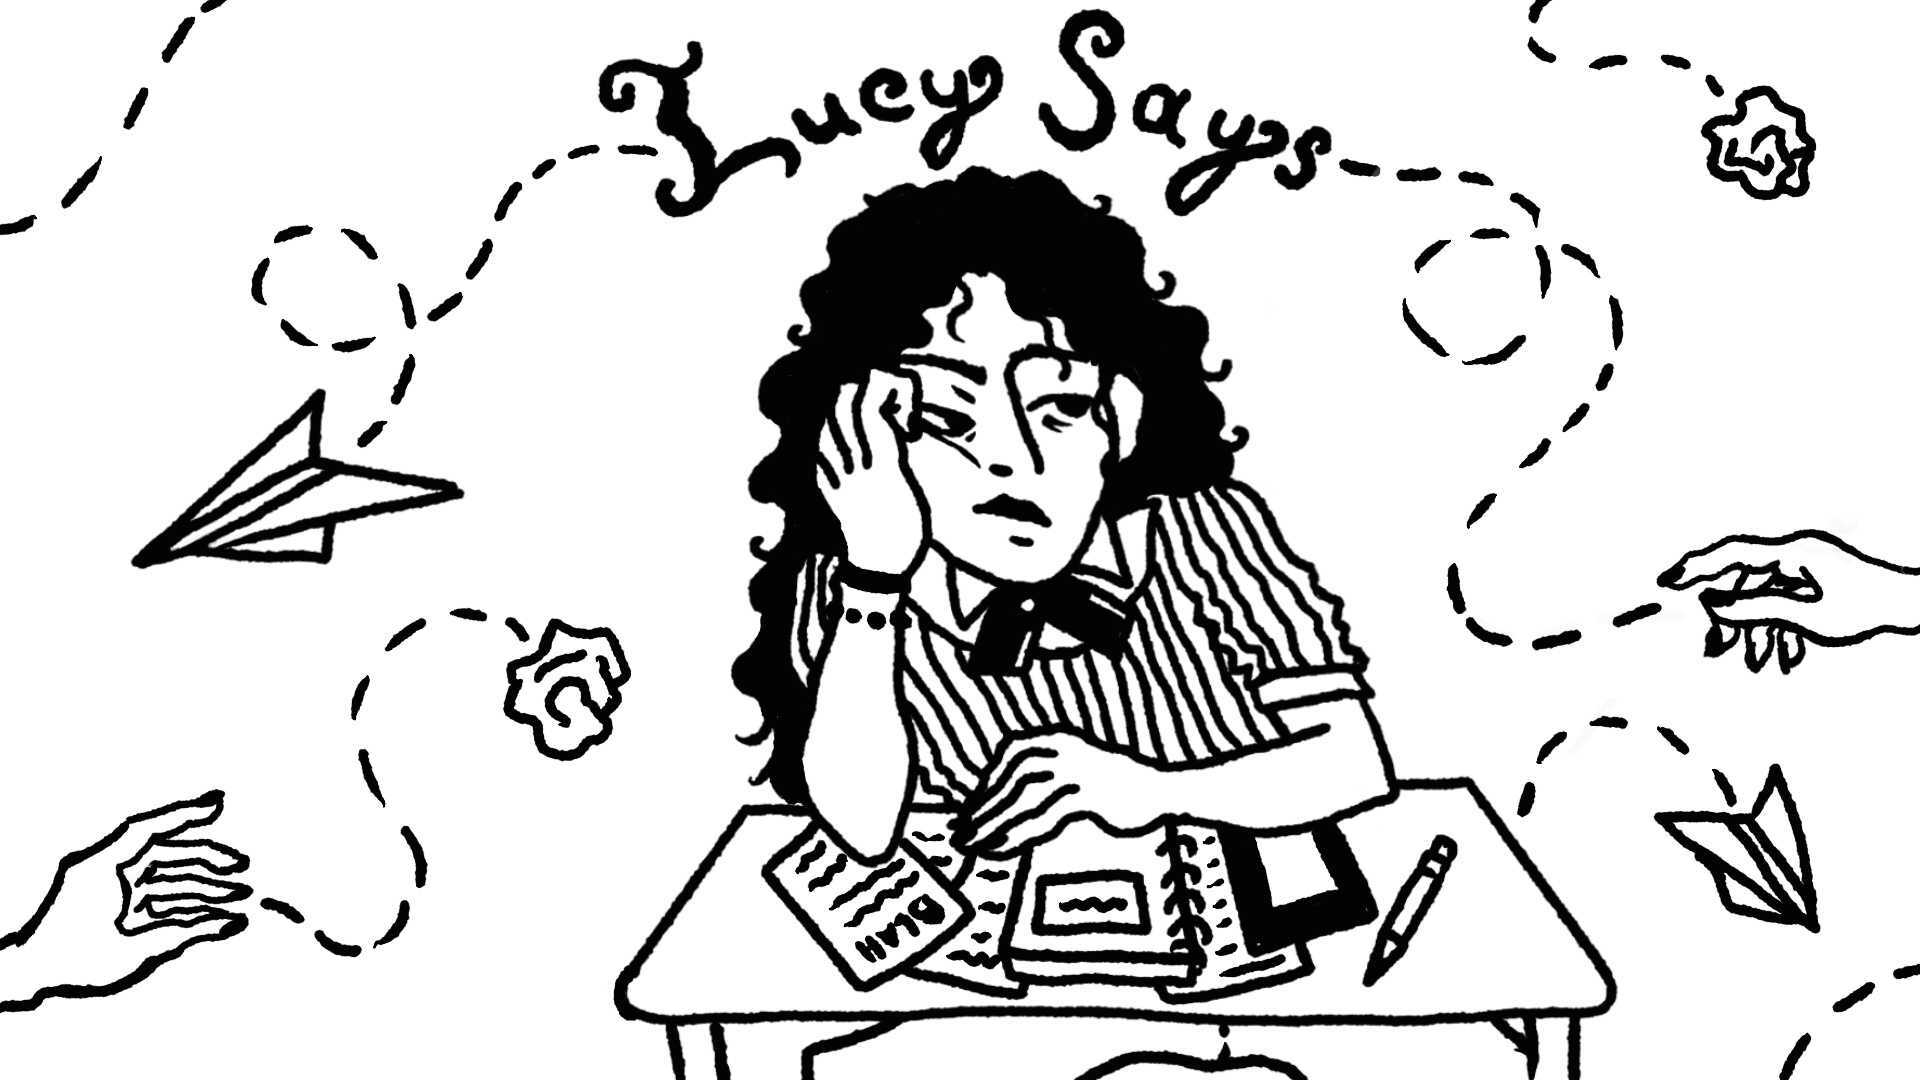 Black-and-white illustration of a student at a desk looking bored with the words “Lucy Says” above their head while paper airplanes fly in the background.